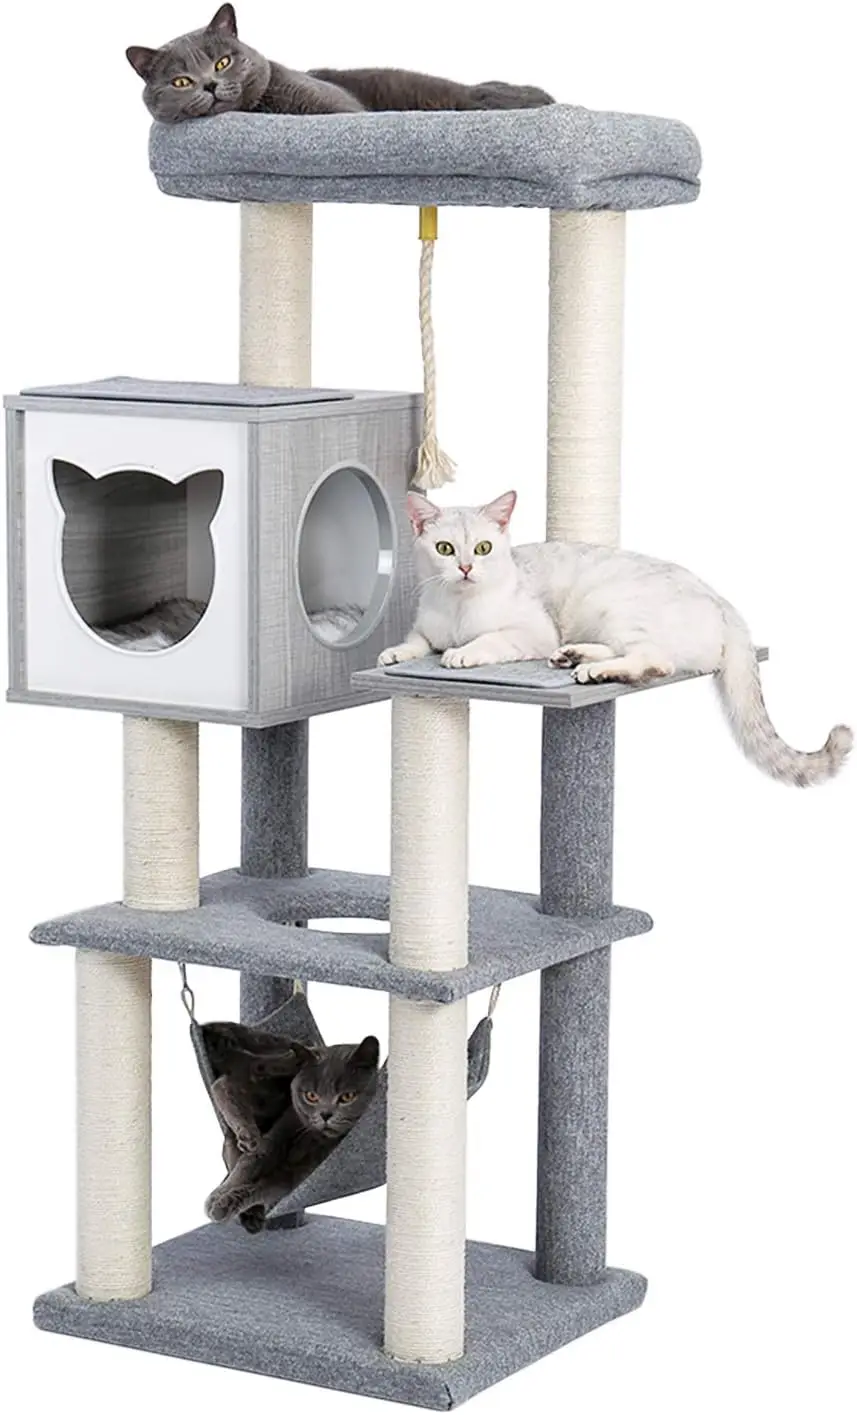 

Modern Cat Tree for Indoor Adult Cats, Wood Cat Tower Sturdy with Hammock for Large Cat, 52" Tall Level Kitty Condo Heavy Du